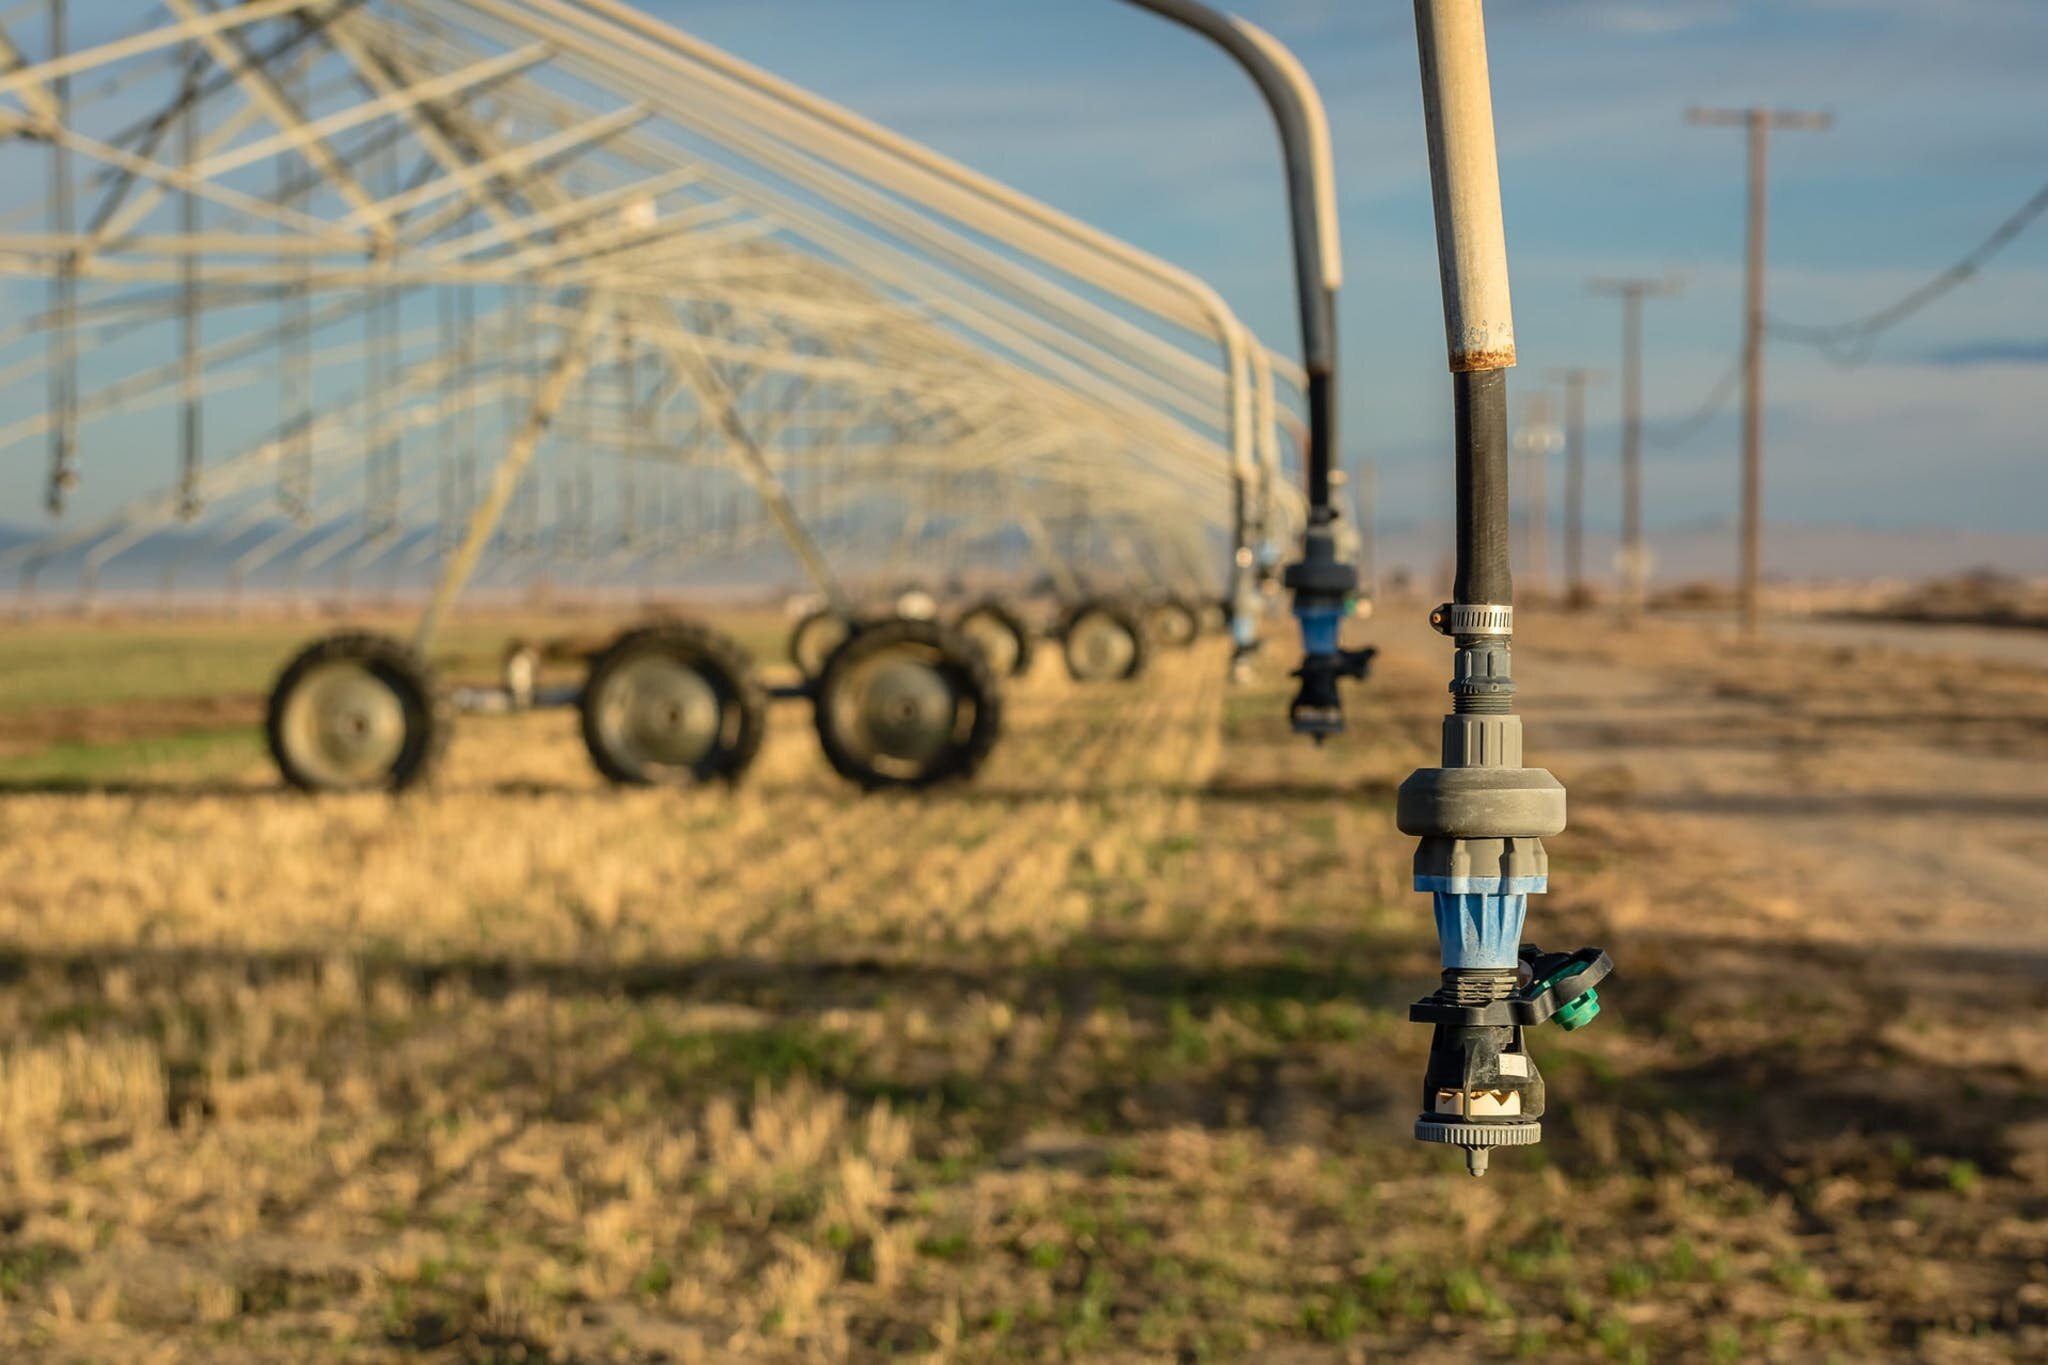 A center-pivot irrigation system in Southern California. According to NOAA (National Oceanic and Atmospheric Administration), as of mid-July, 2021, 89% of the U.S. West was in drought and 25% was in exceptional drought conditions. Photo: Steve Harvey/ Unsplash